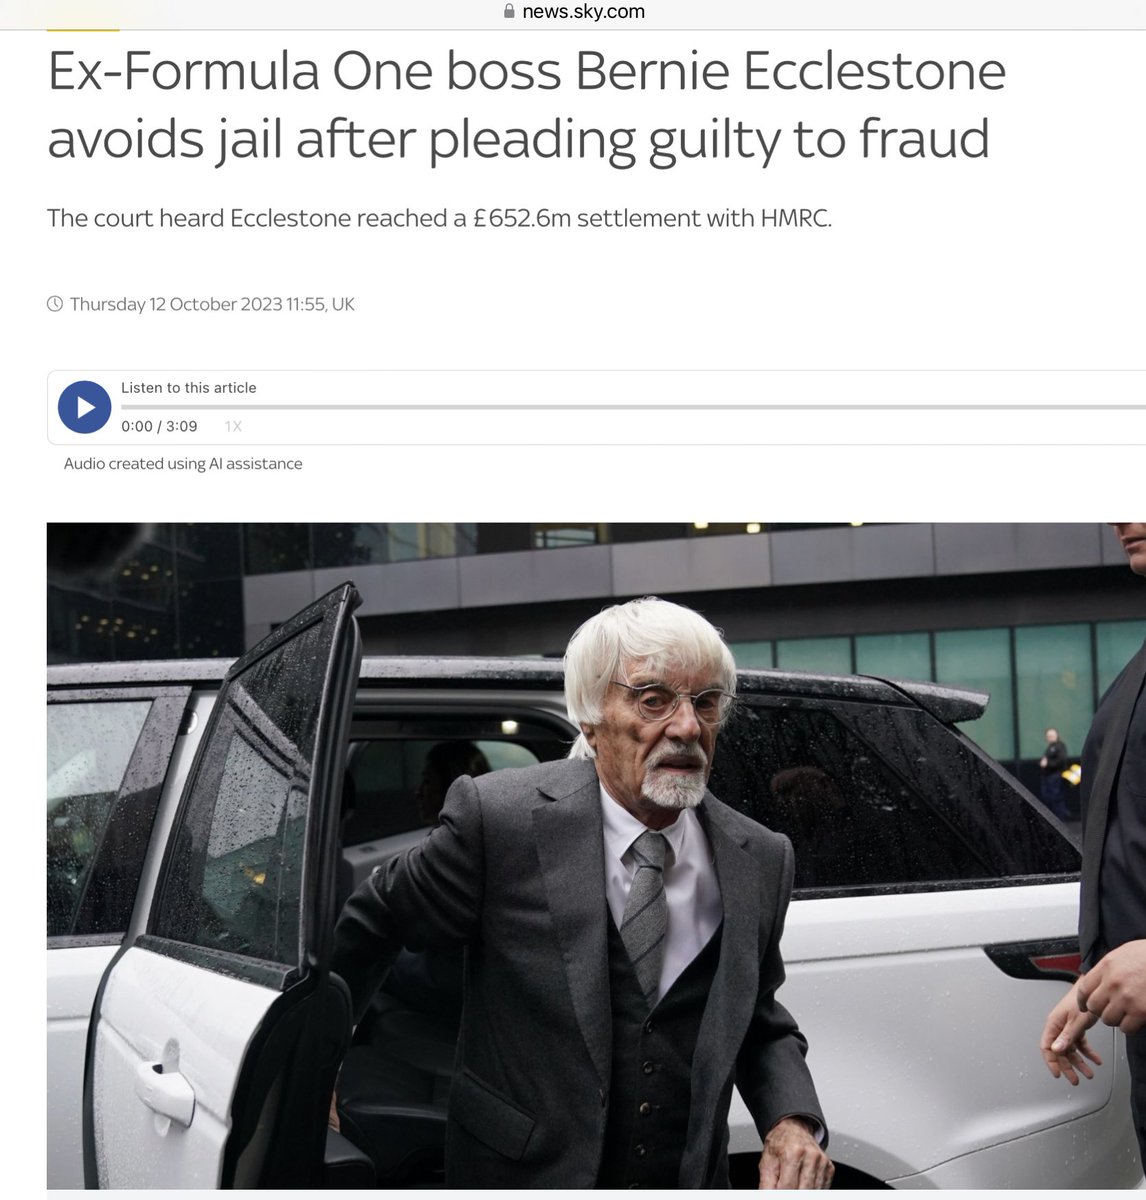 The ludicrous suspended prison sentence handed down to serial tax evader and all-round shitbag Bernie Ecclestone represents an enormous finger up to every single person in this country who has always paid what they owe and, by doing so, contribute to life in Britain. Disgusting.